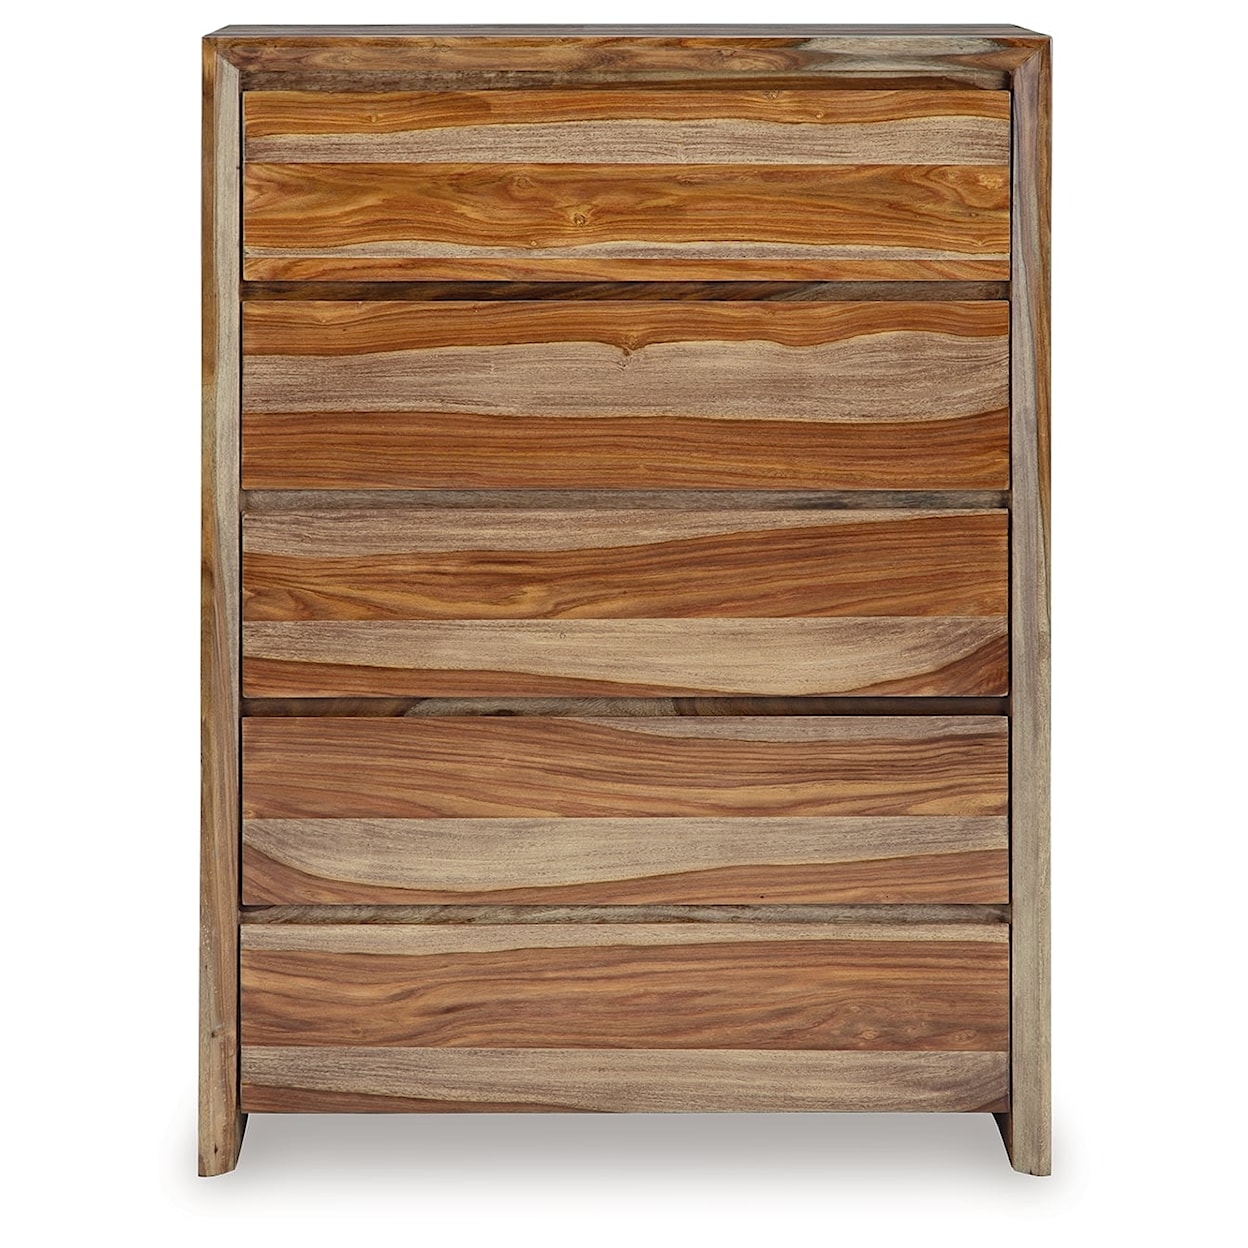 Signature Design by Ashley Dressonni 5-Drawer Chest